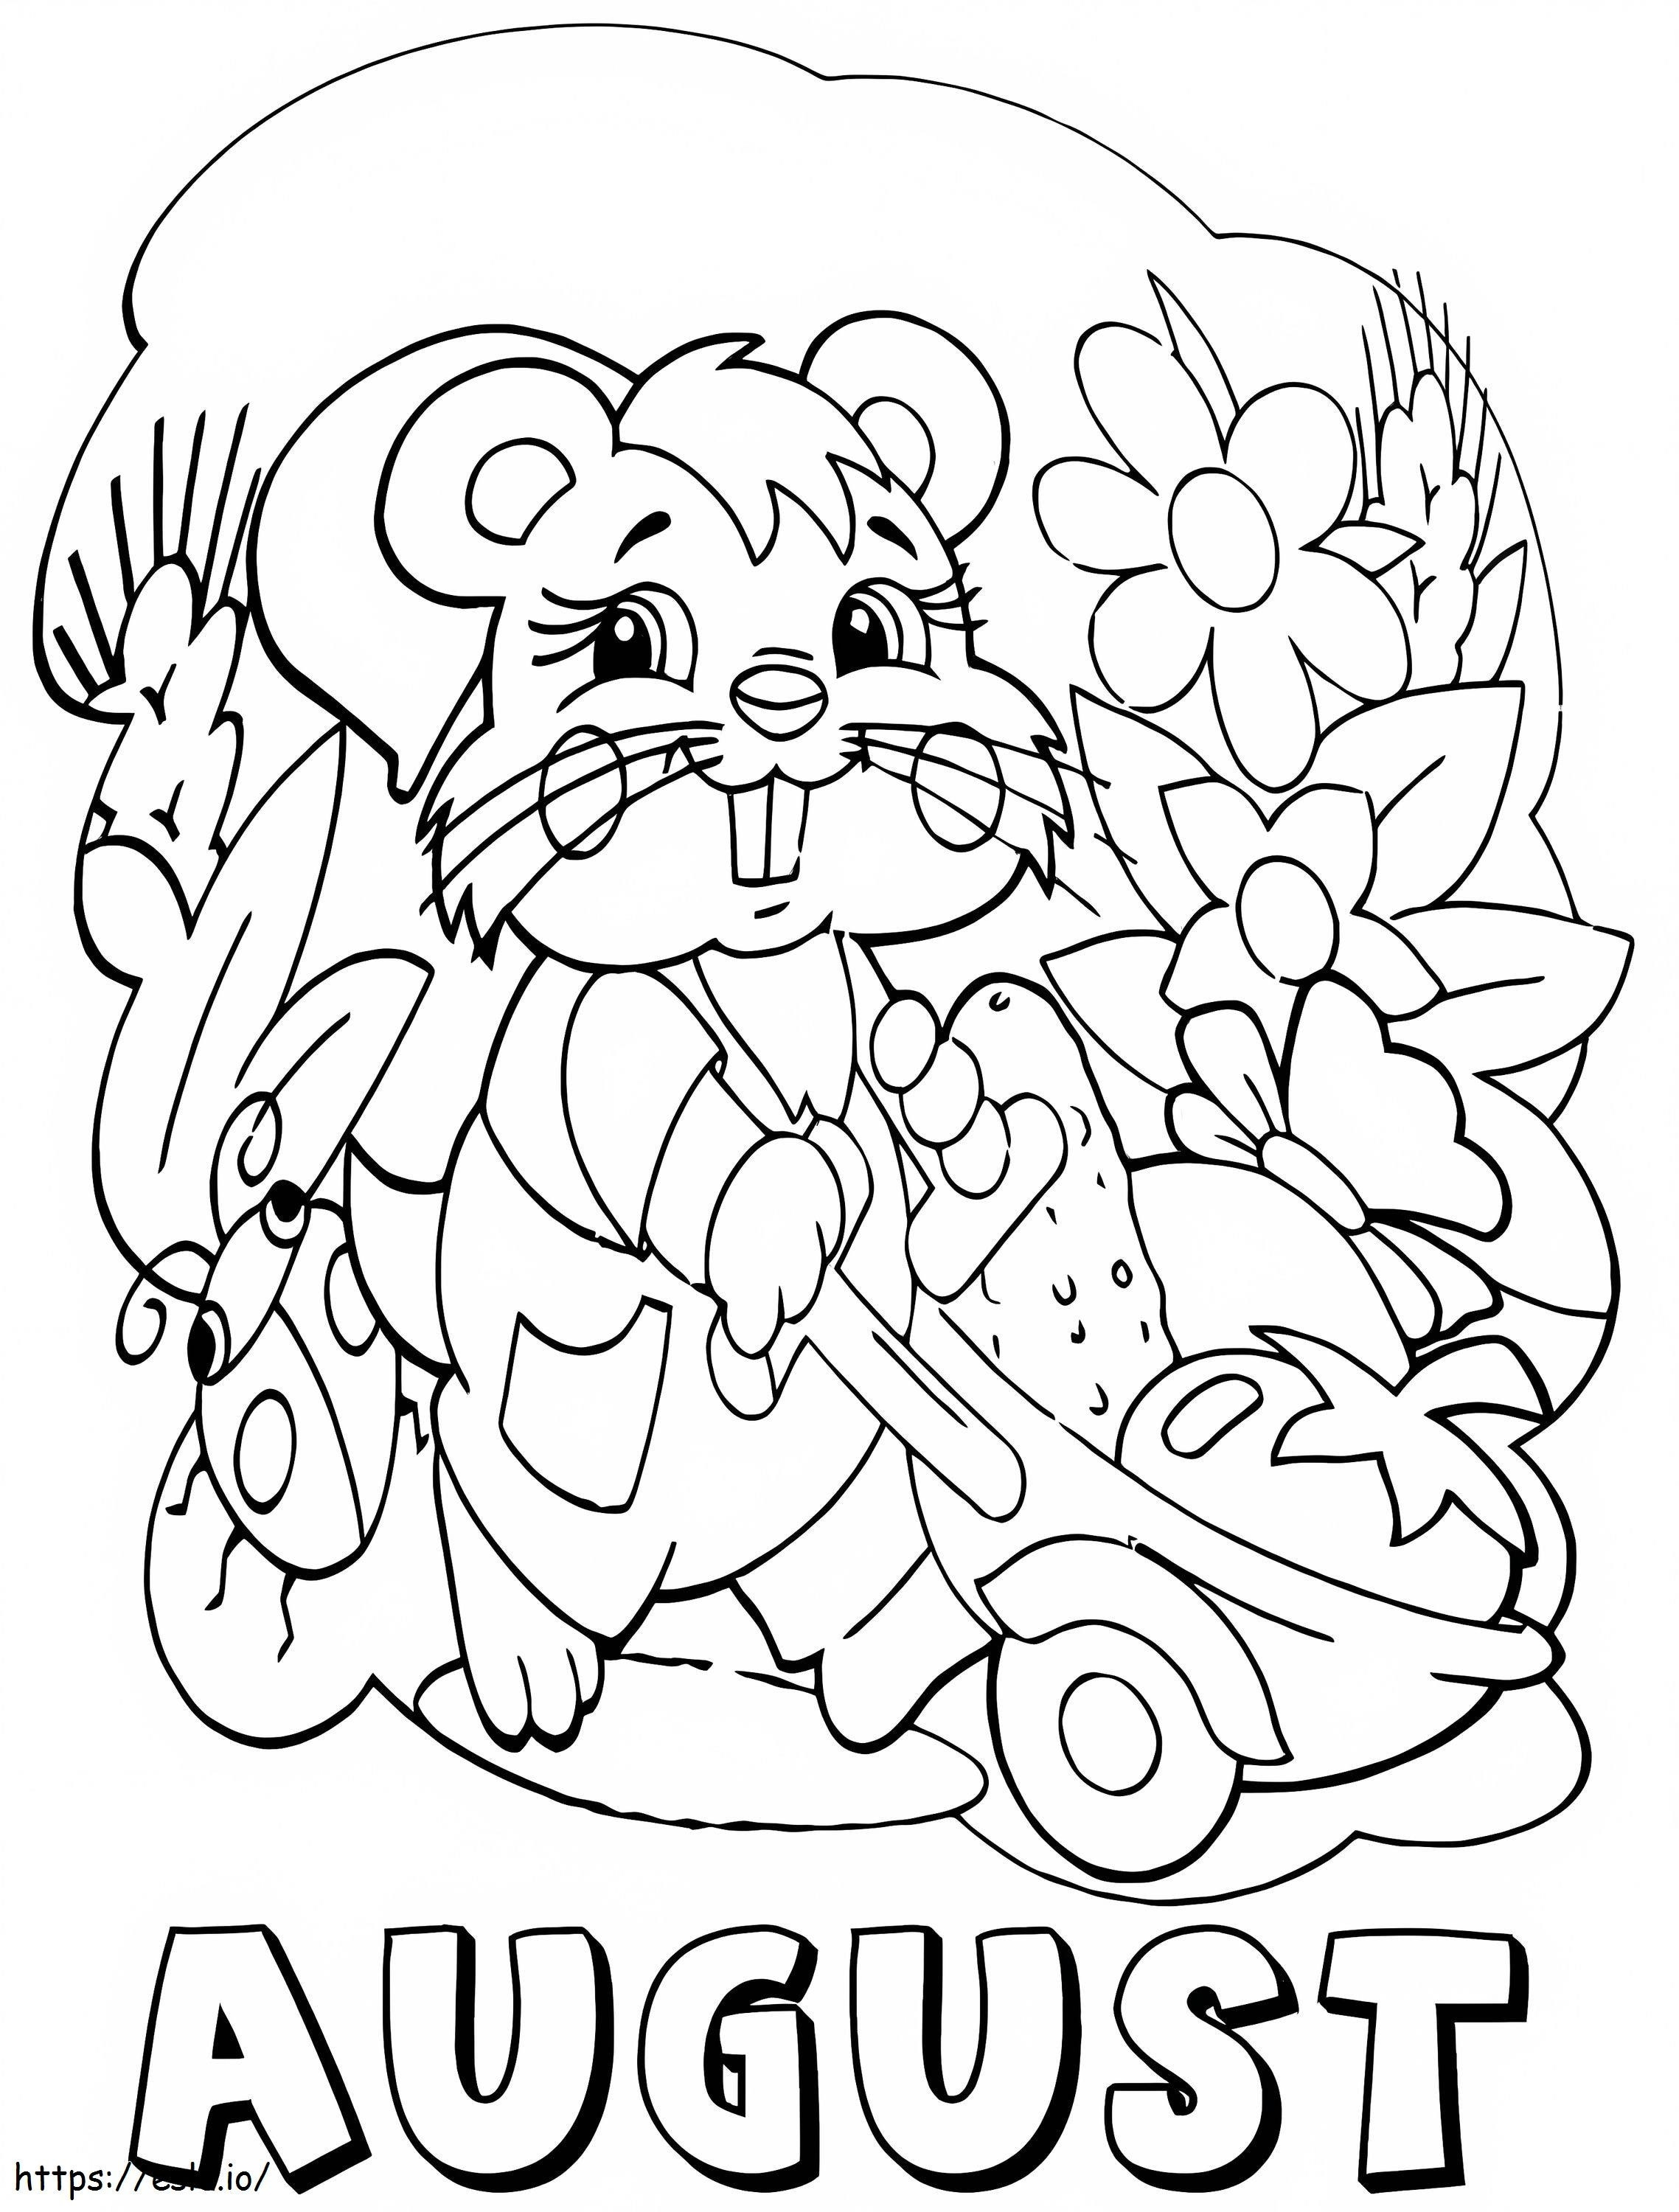 August Rabbit Farmer coloring page